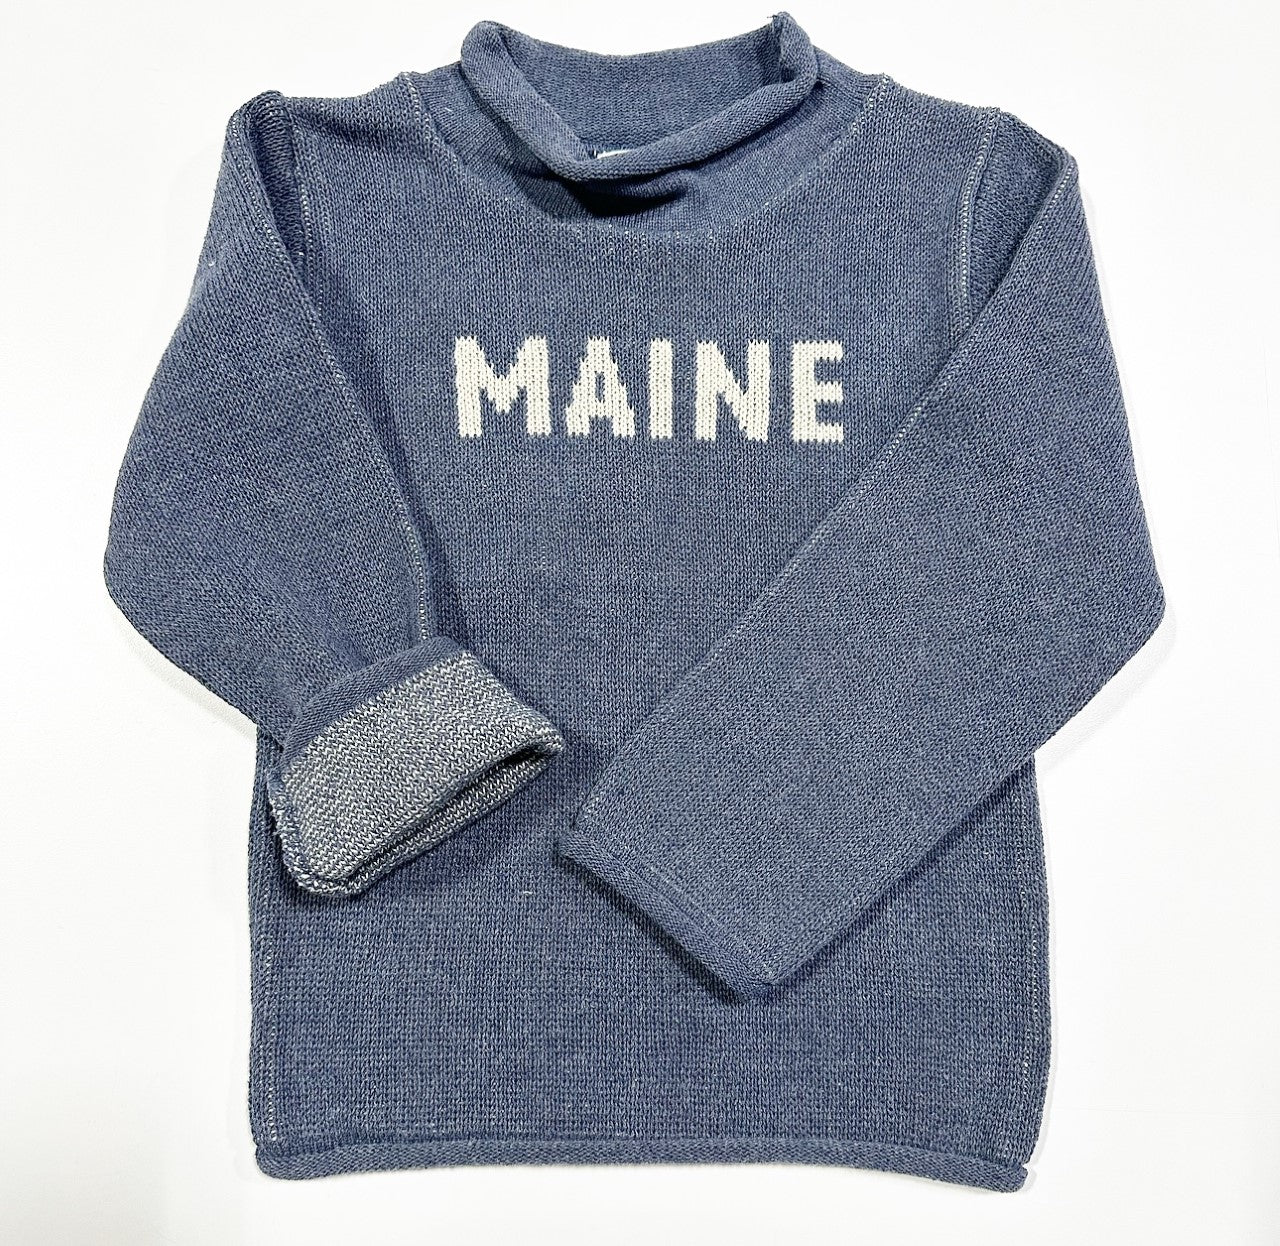 MAINE YOUTH SWEATER